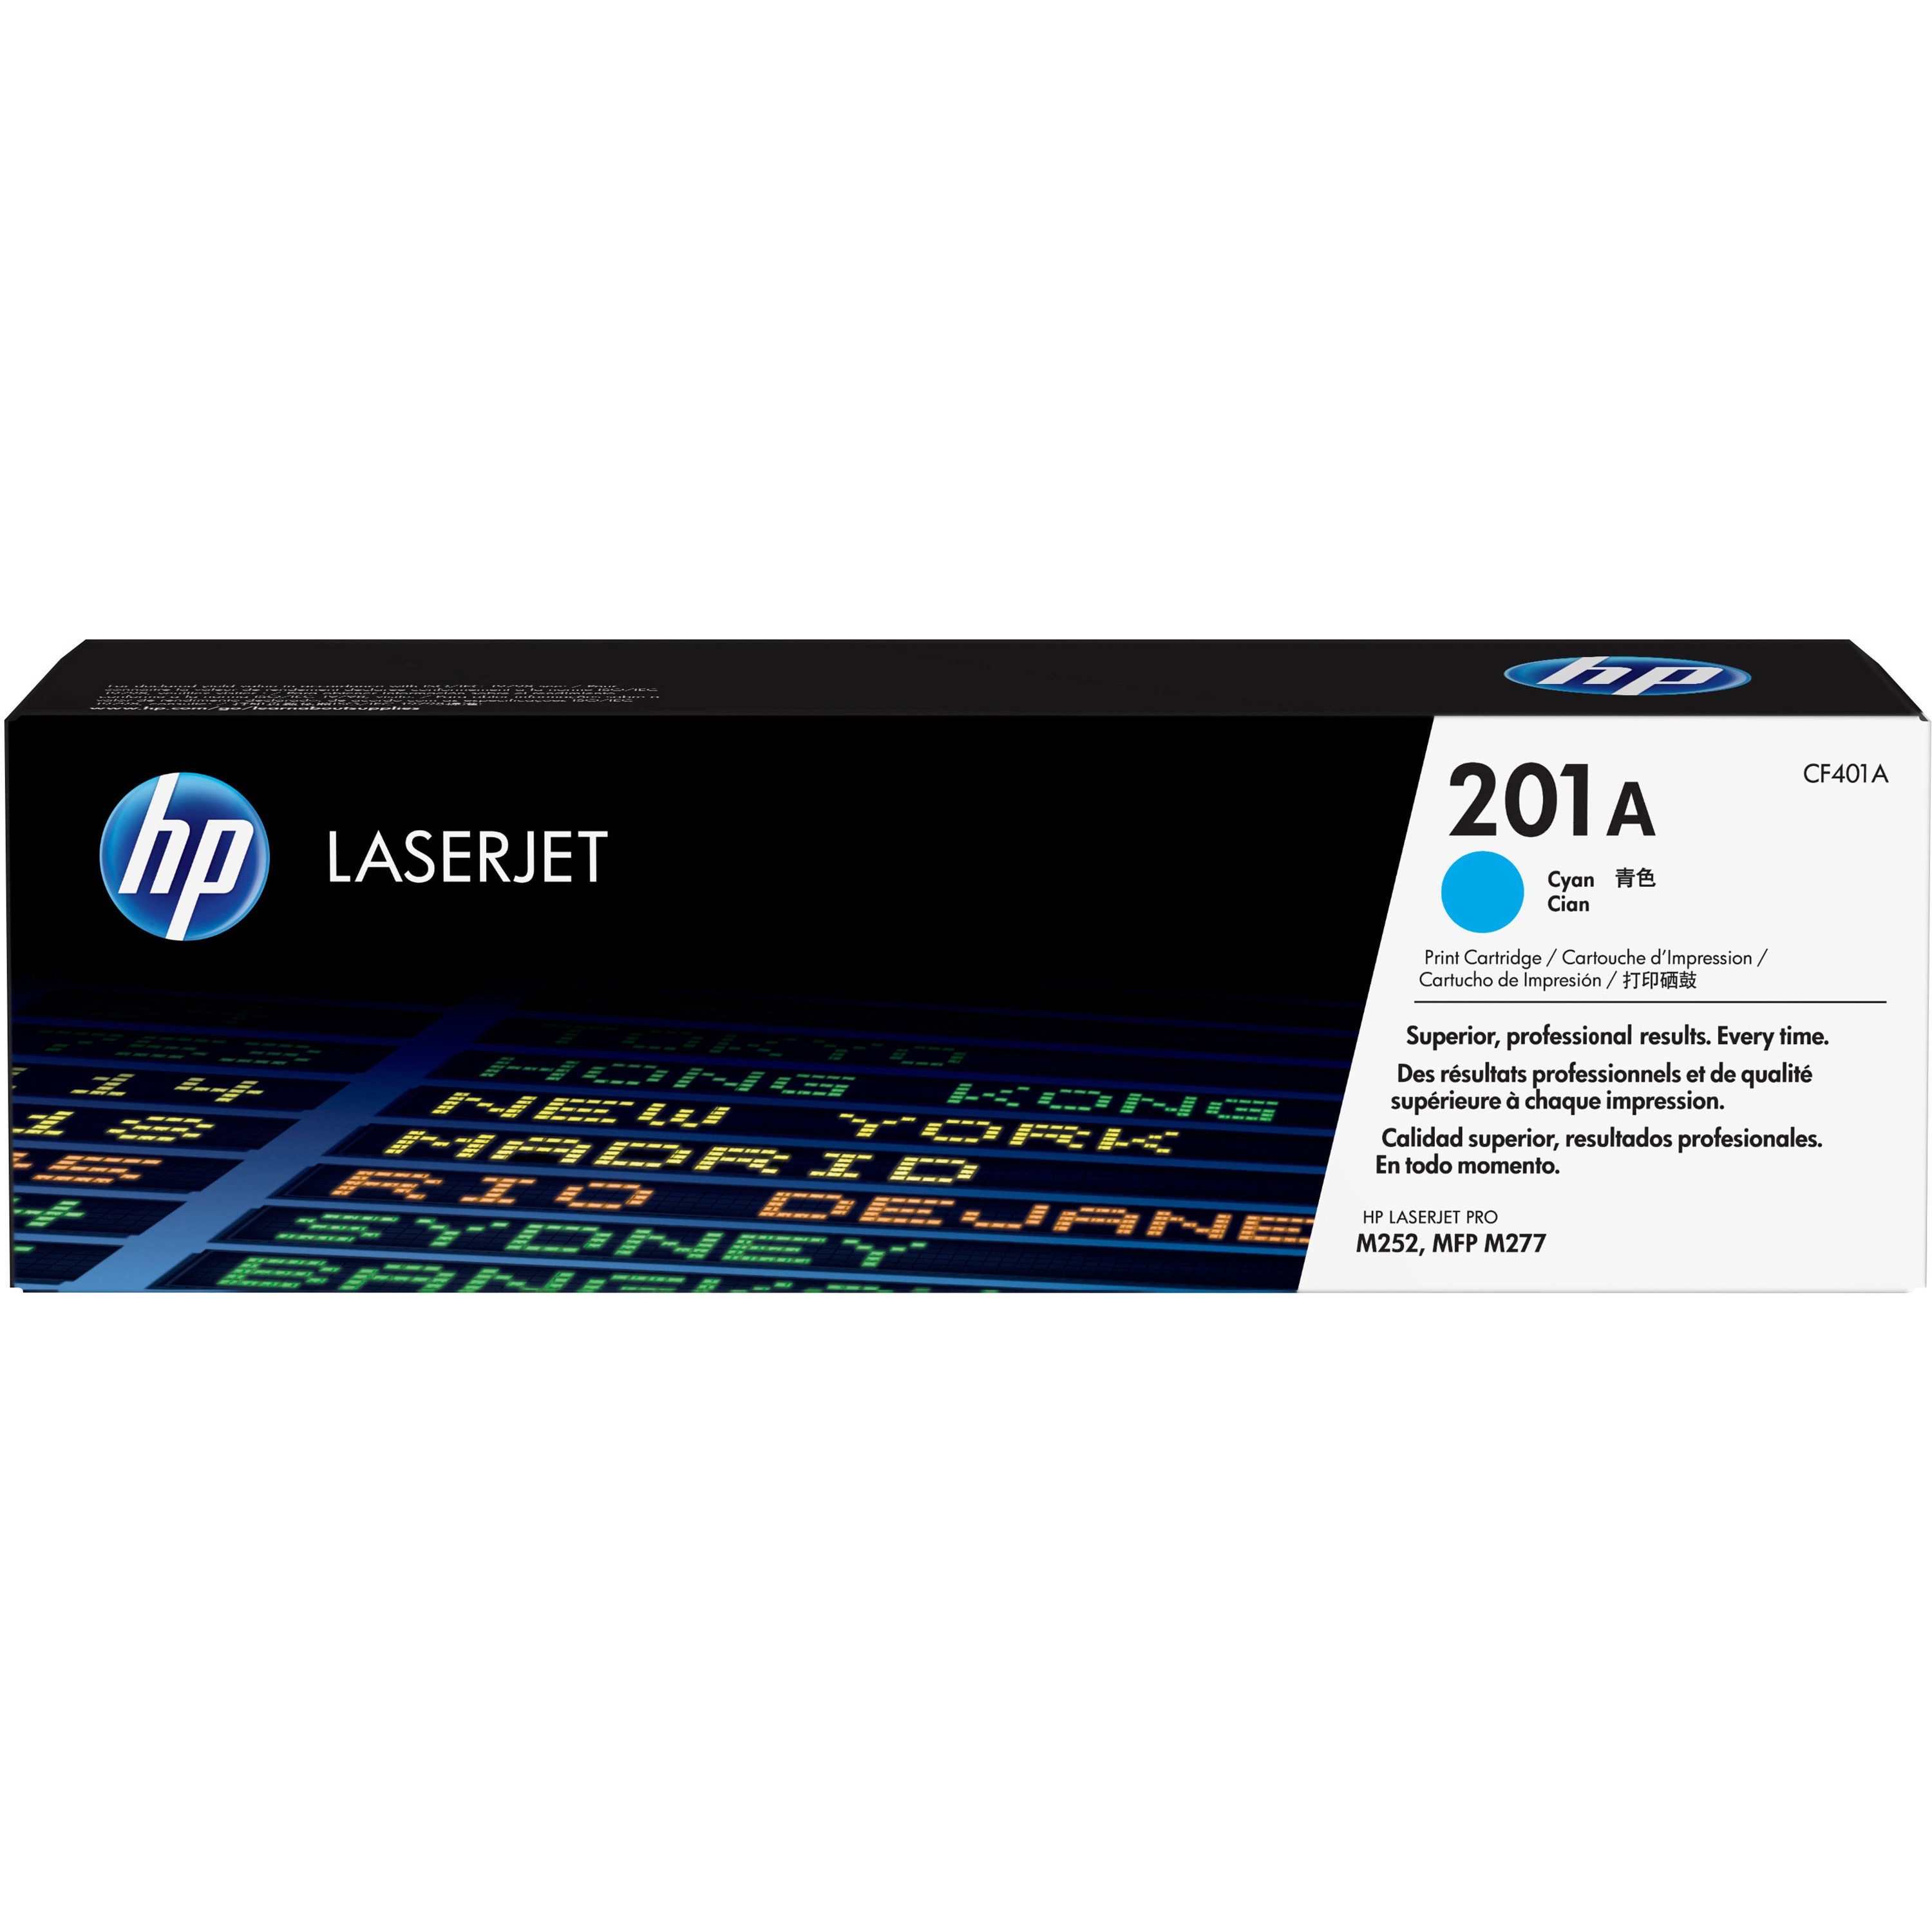 HEW113100 - HP Papers Premium32 Laser Paper - White - 100